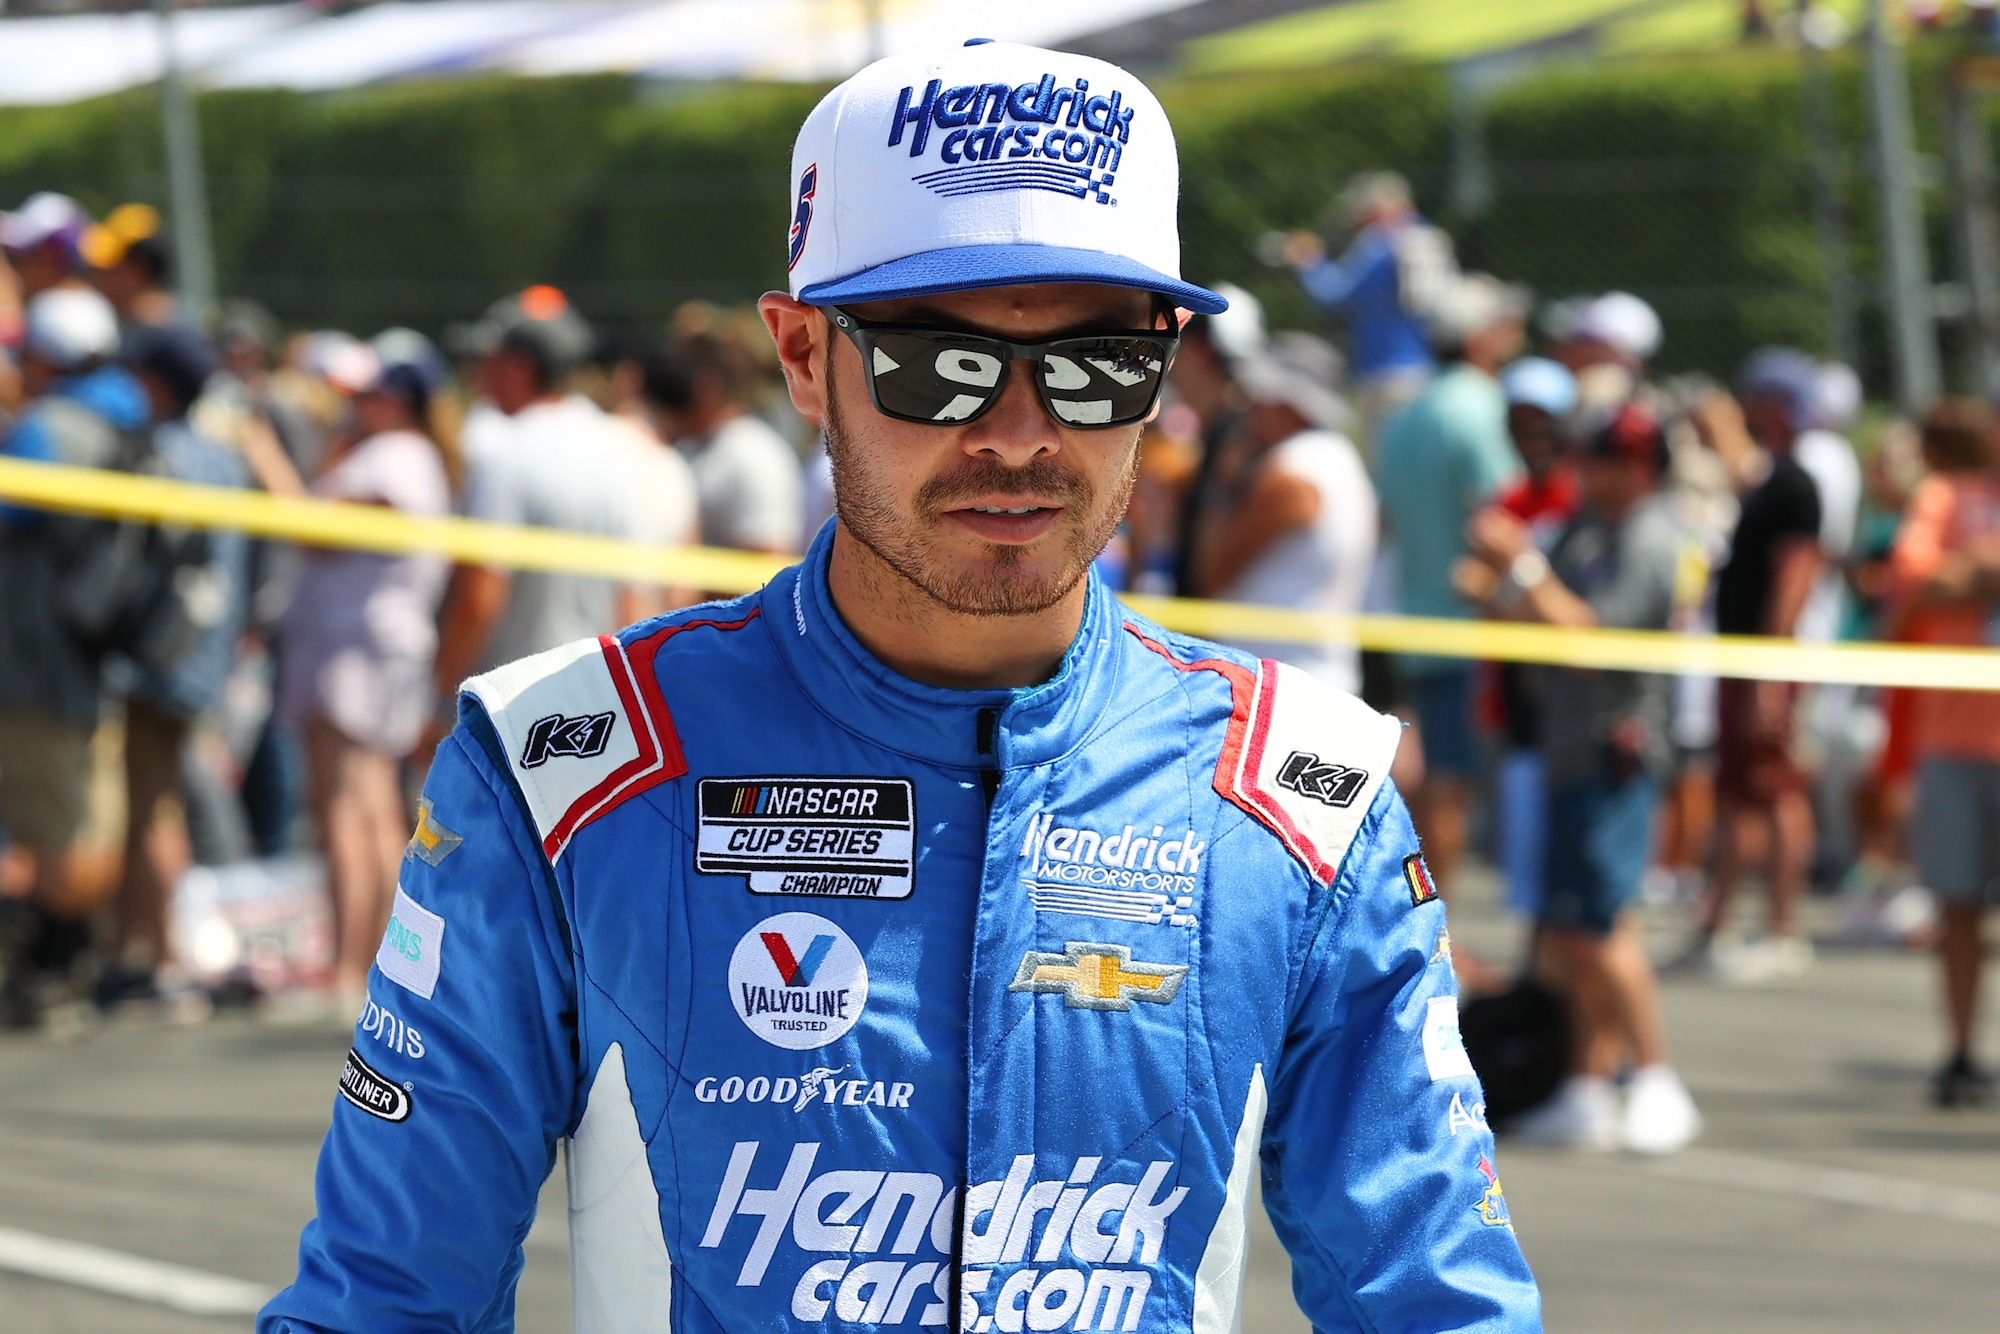 Did Kyle Larson Blackout or Have a Medical Emergency at Indianapolis Before His Violent Crash with Ty Dillon?